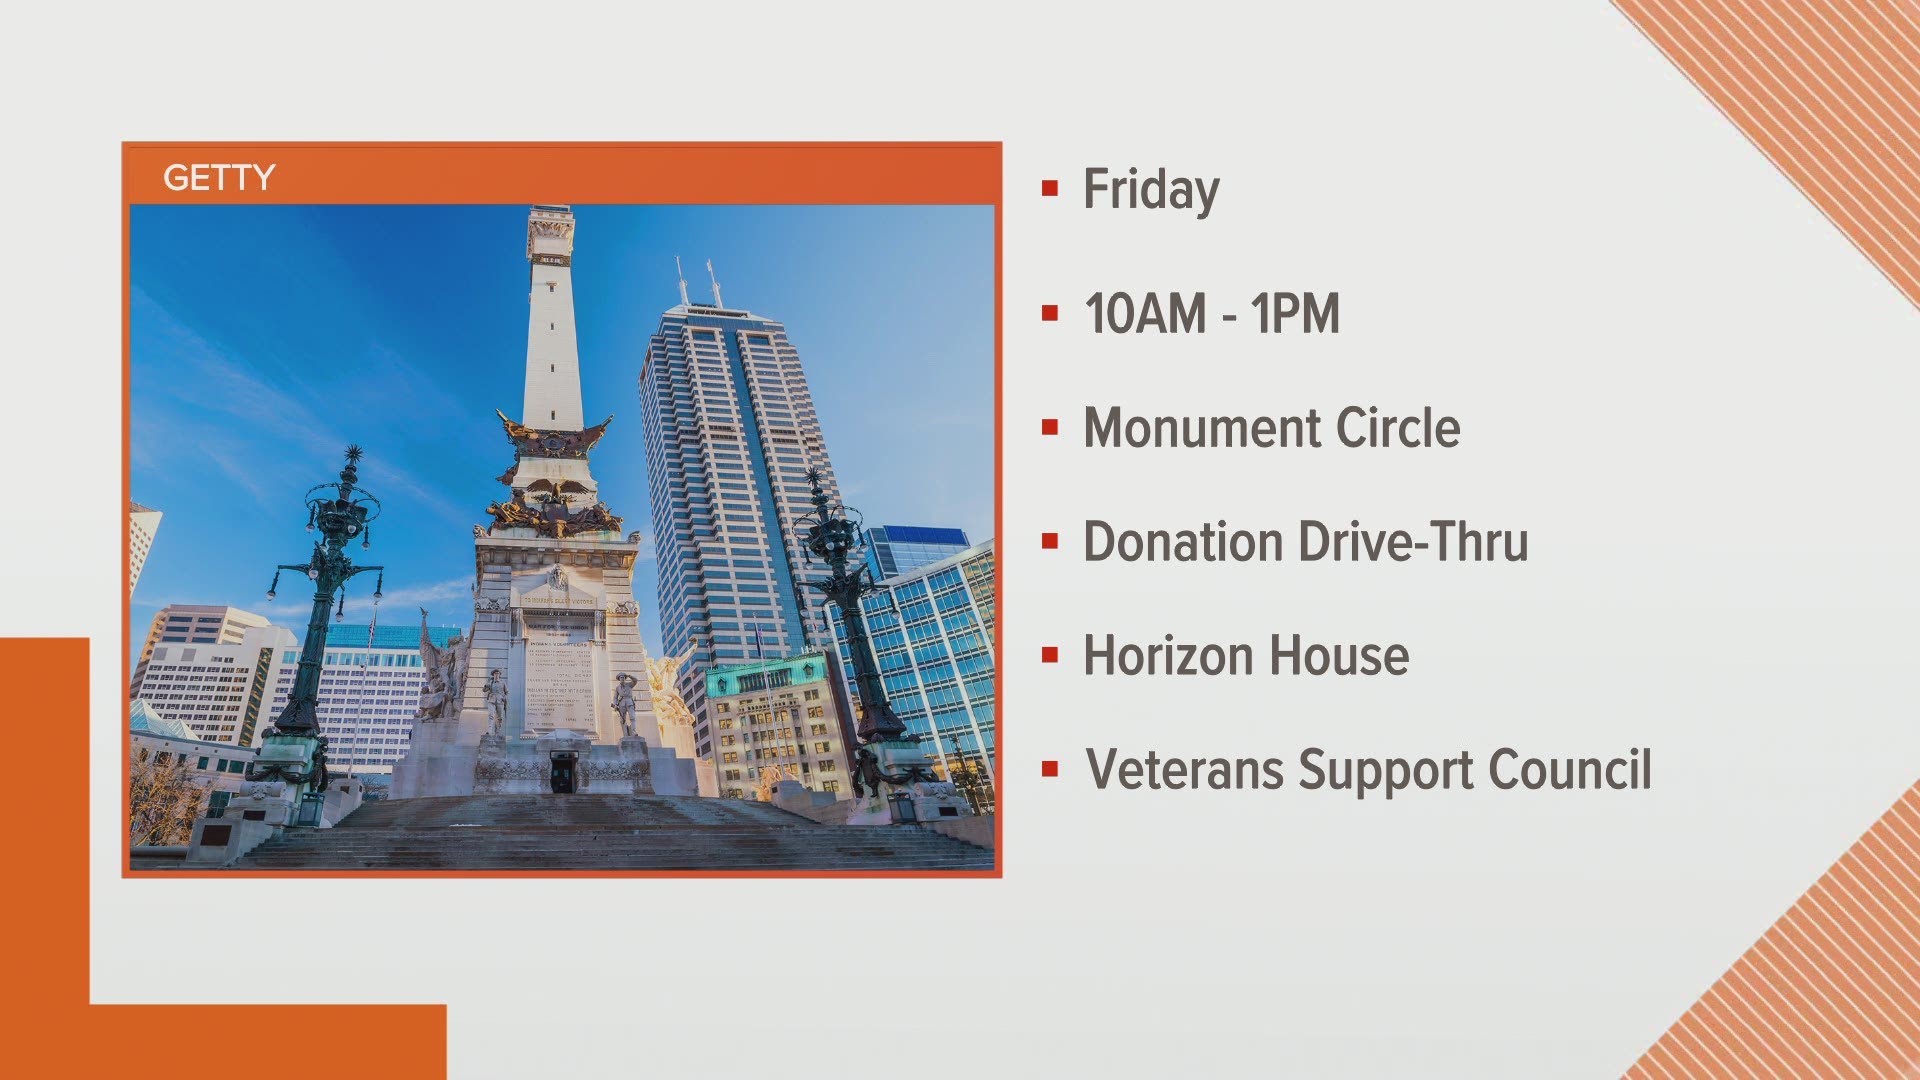 On Friday, Feb. 19, you can drop off donations on the southwest side of Monument Circle from 10 a.m. to 1 p.m.